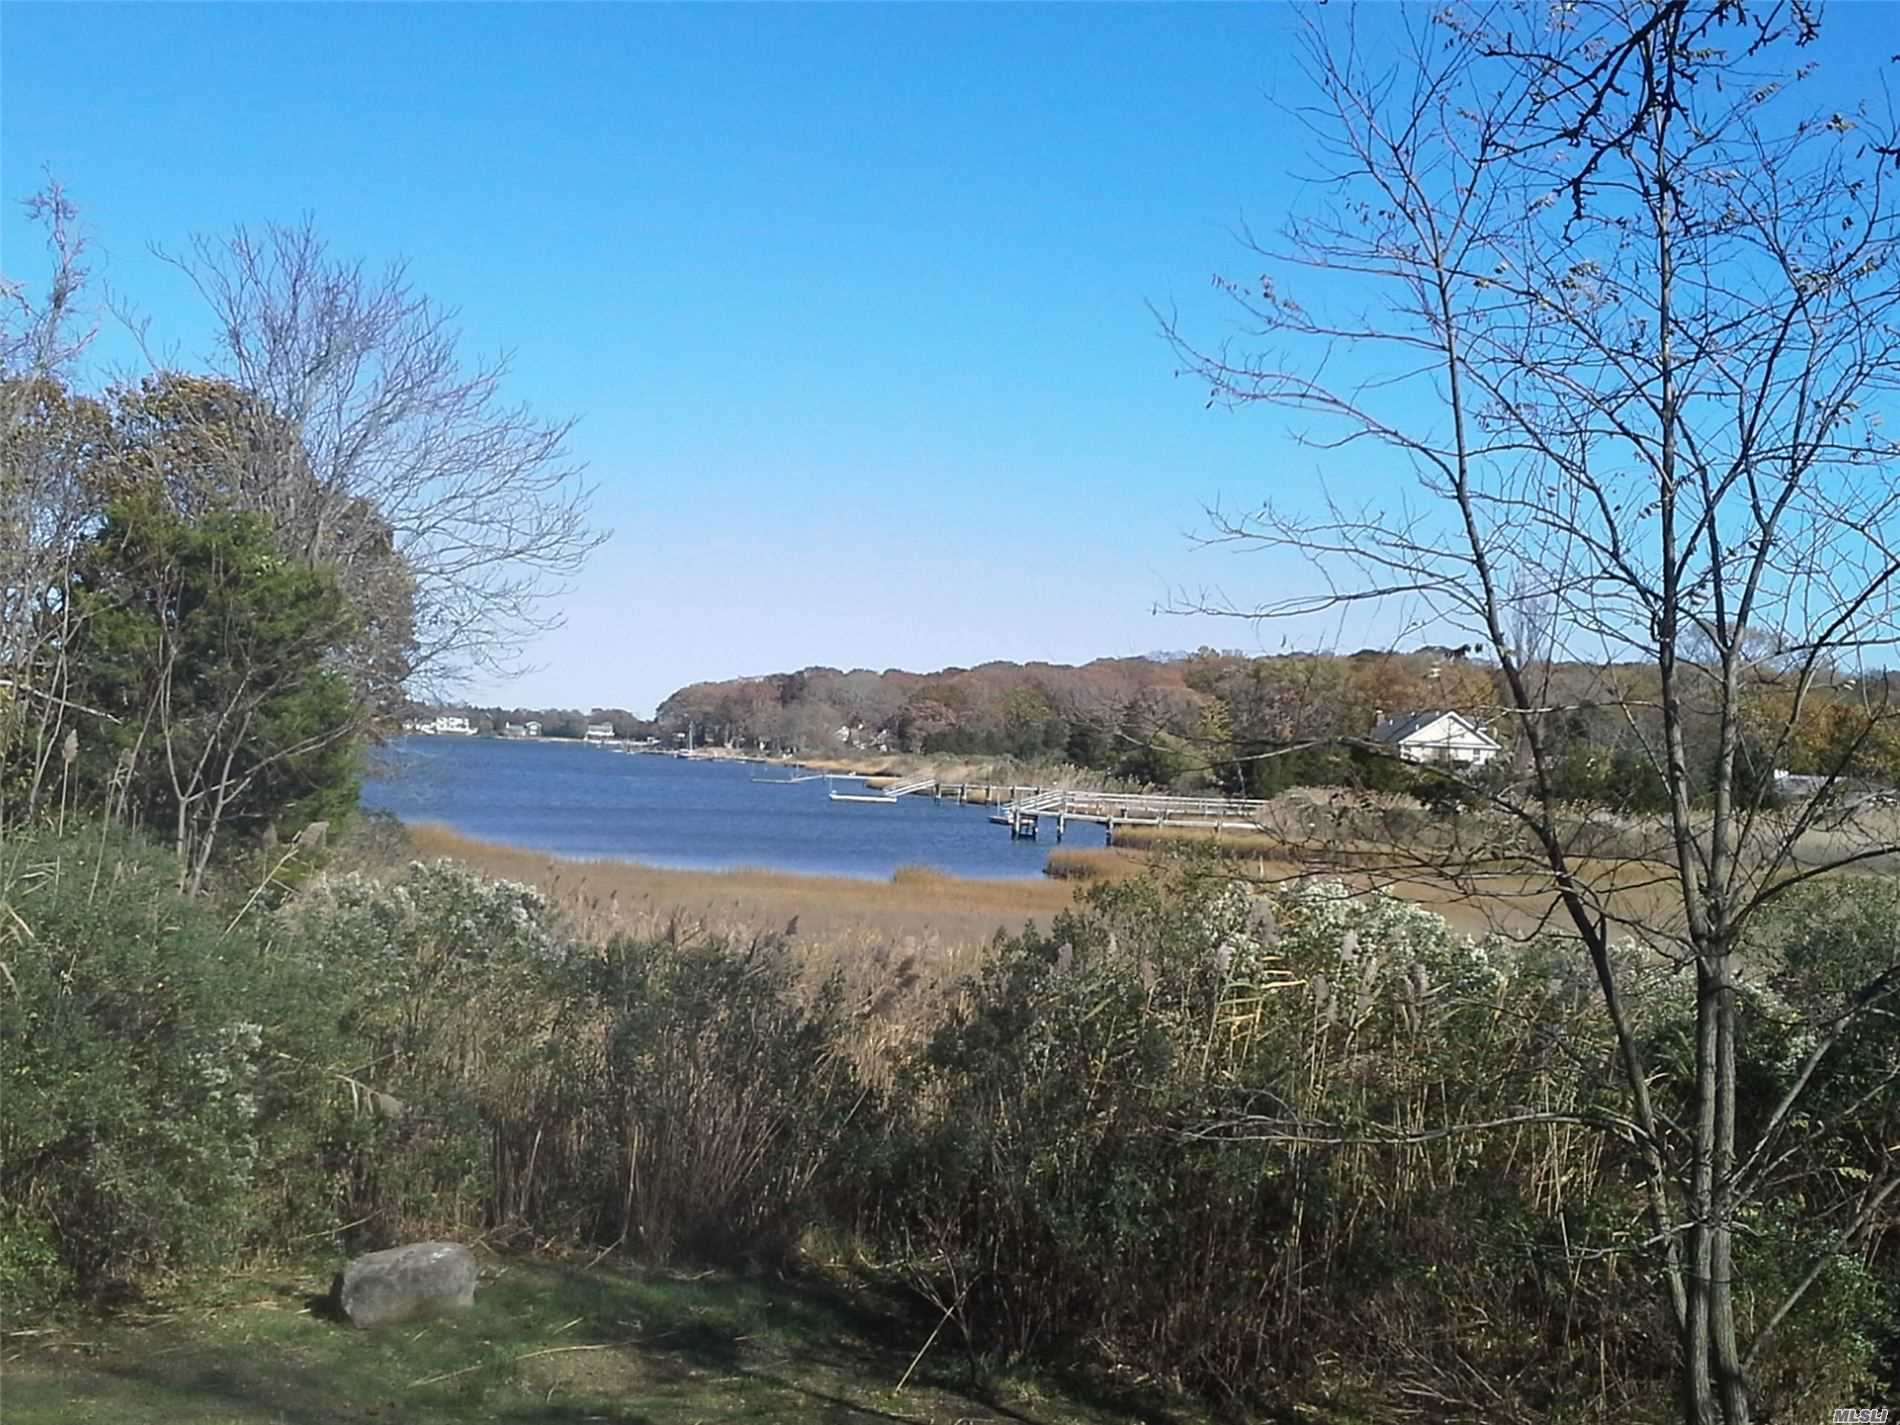 Charming 2, 500+ Sq. Ft. Home with Creek Views on .75 Ac. 3/4 Bedrooms, 2 Baths, Large Living Room  Kitchen, Dining Area. family rm large closets Bay Beach Nearby.